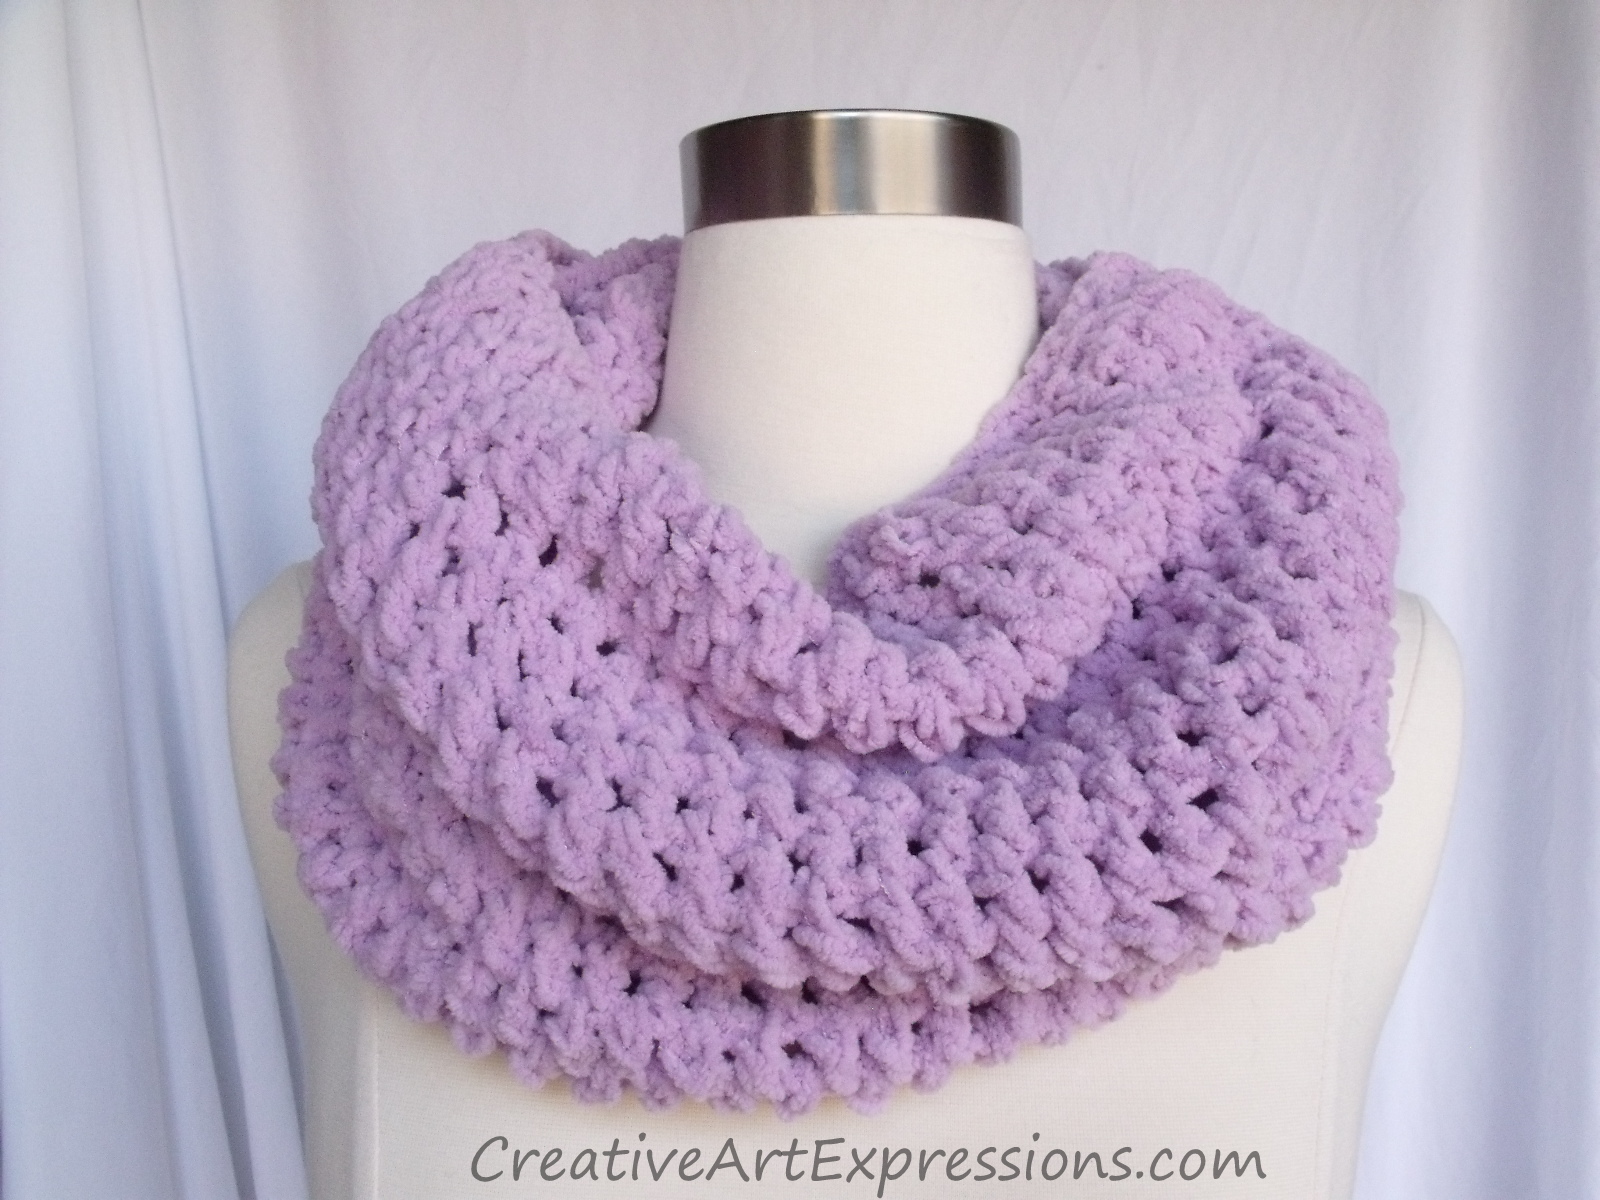 Creative Art Expressions Hand Crocheted Lavender Infinity Scarf